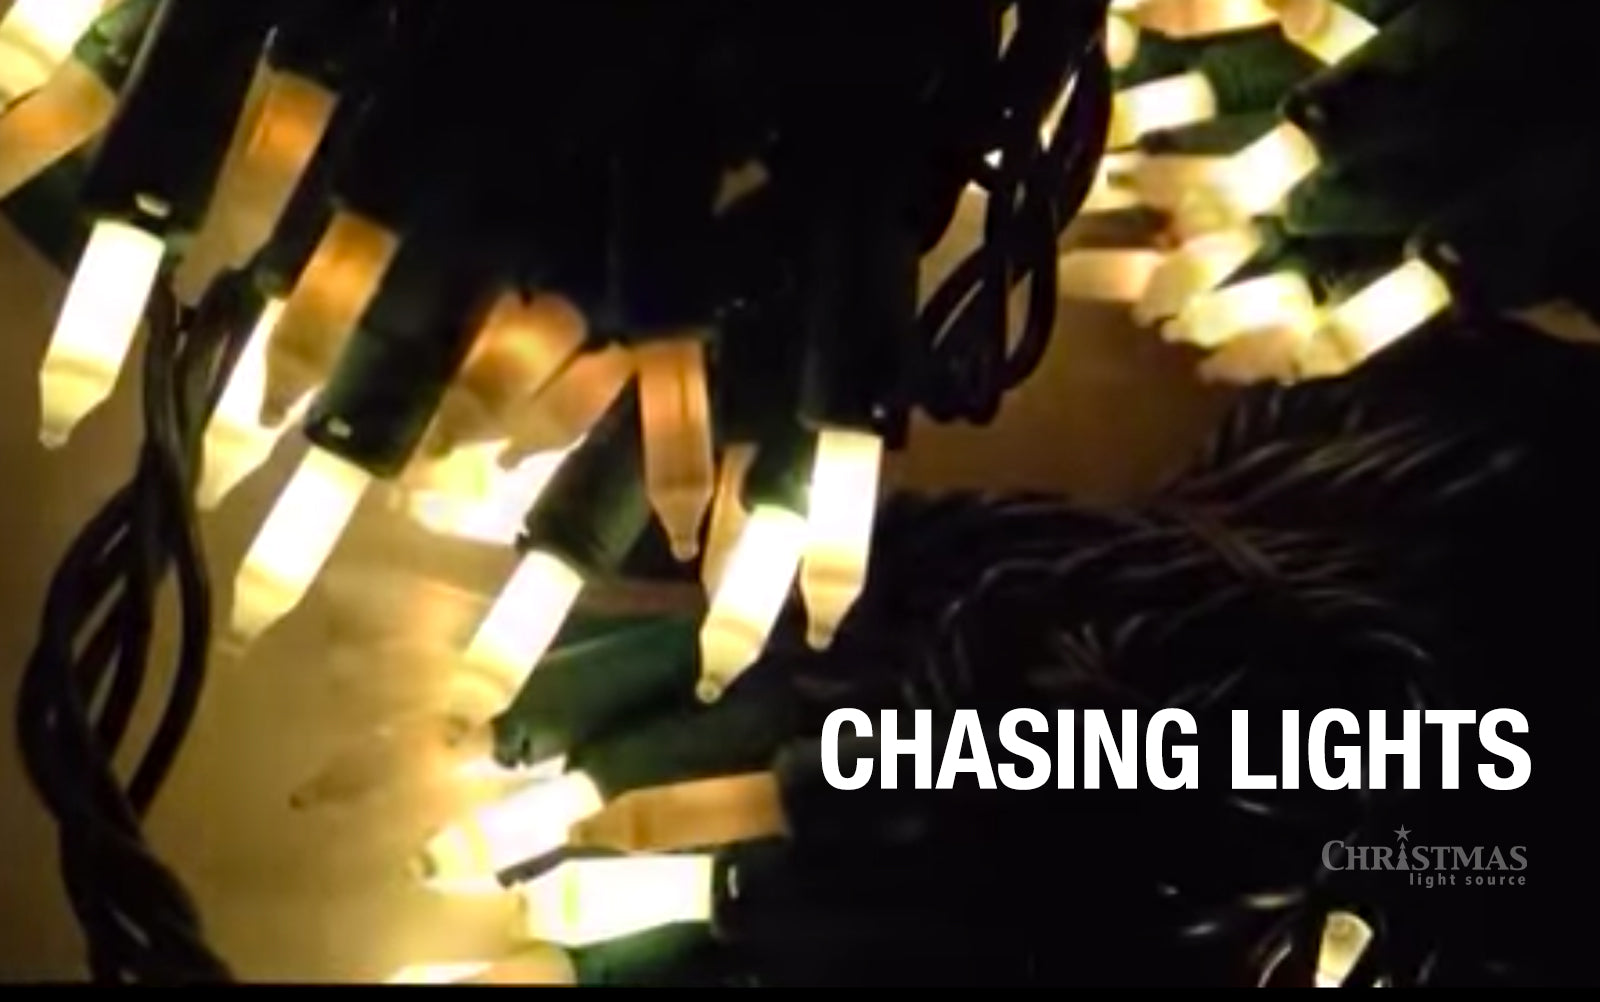 What exactly are chasing Christmas lights and how do they work?